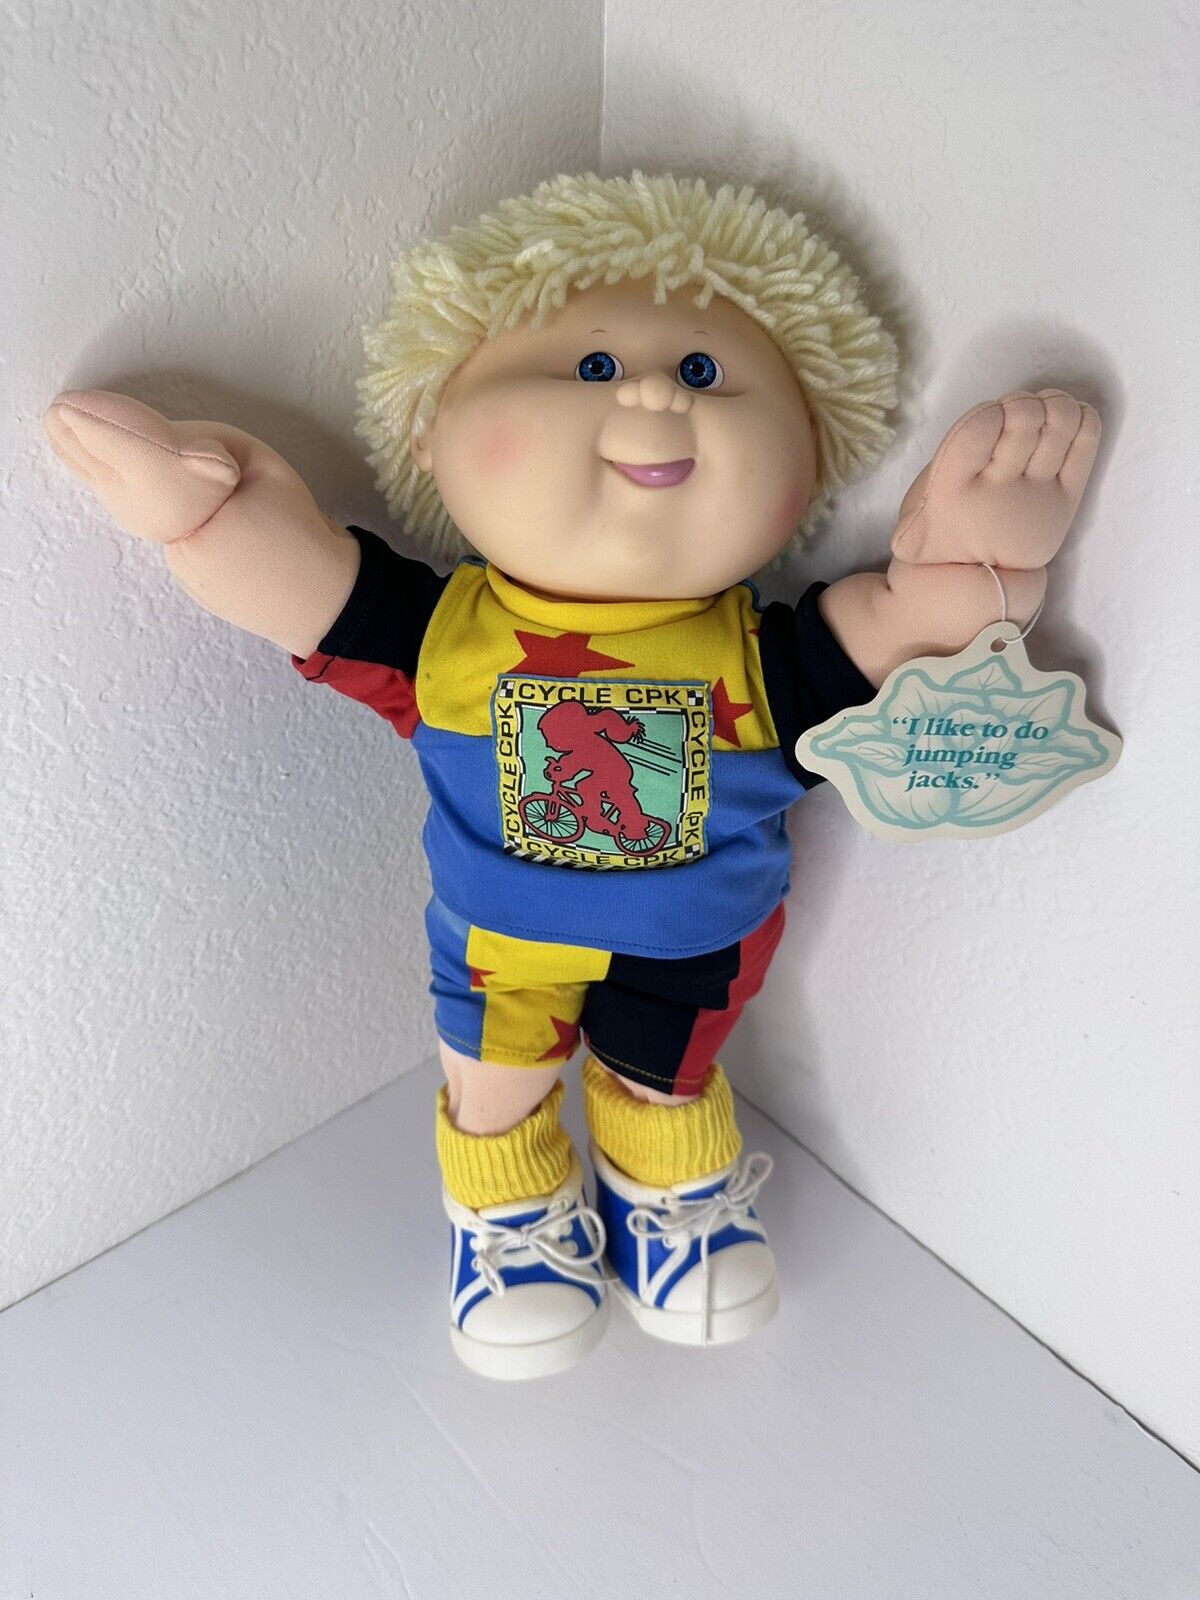 1990 Mattel First Edition Cabbage Patch Kids Doll with Wheat Hair and Mold K25-8 - Vintage Collectible in Perfect Condition - TreasuTiques